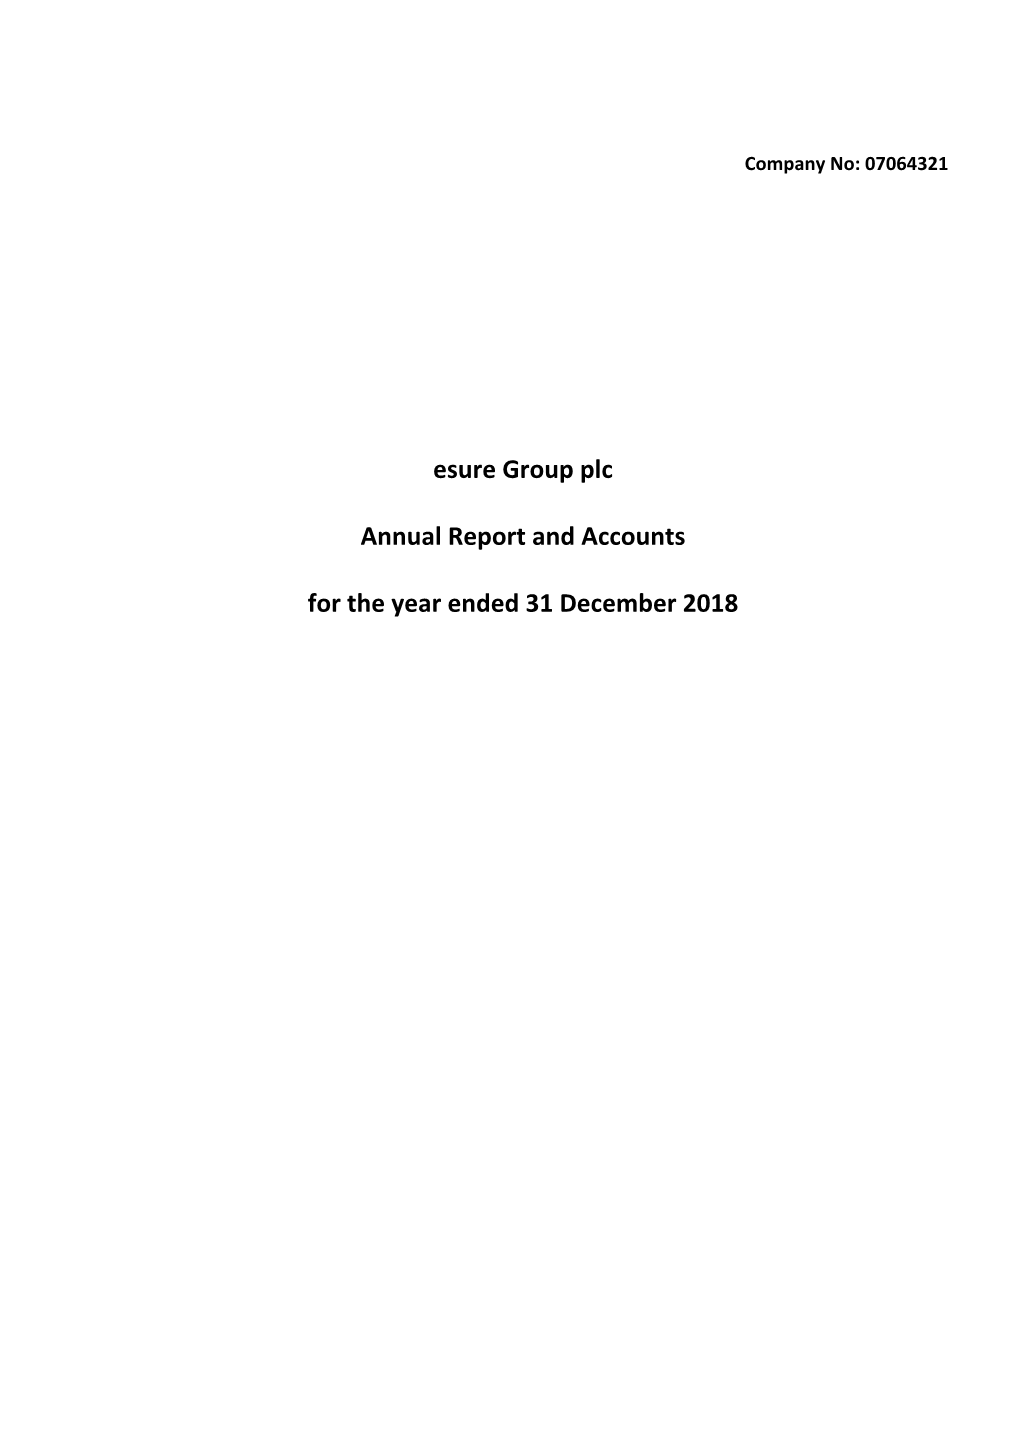 Esure Group Plc Annual Report and Accounts For